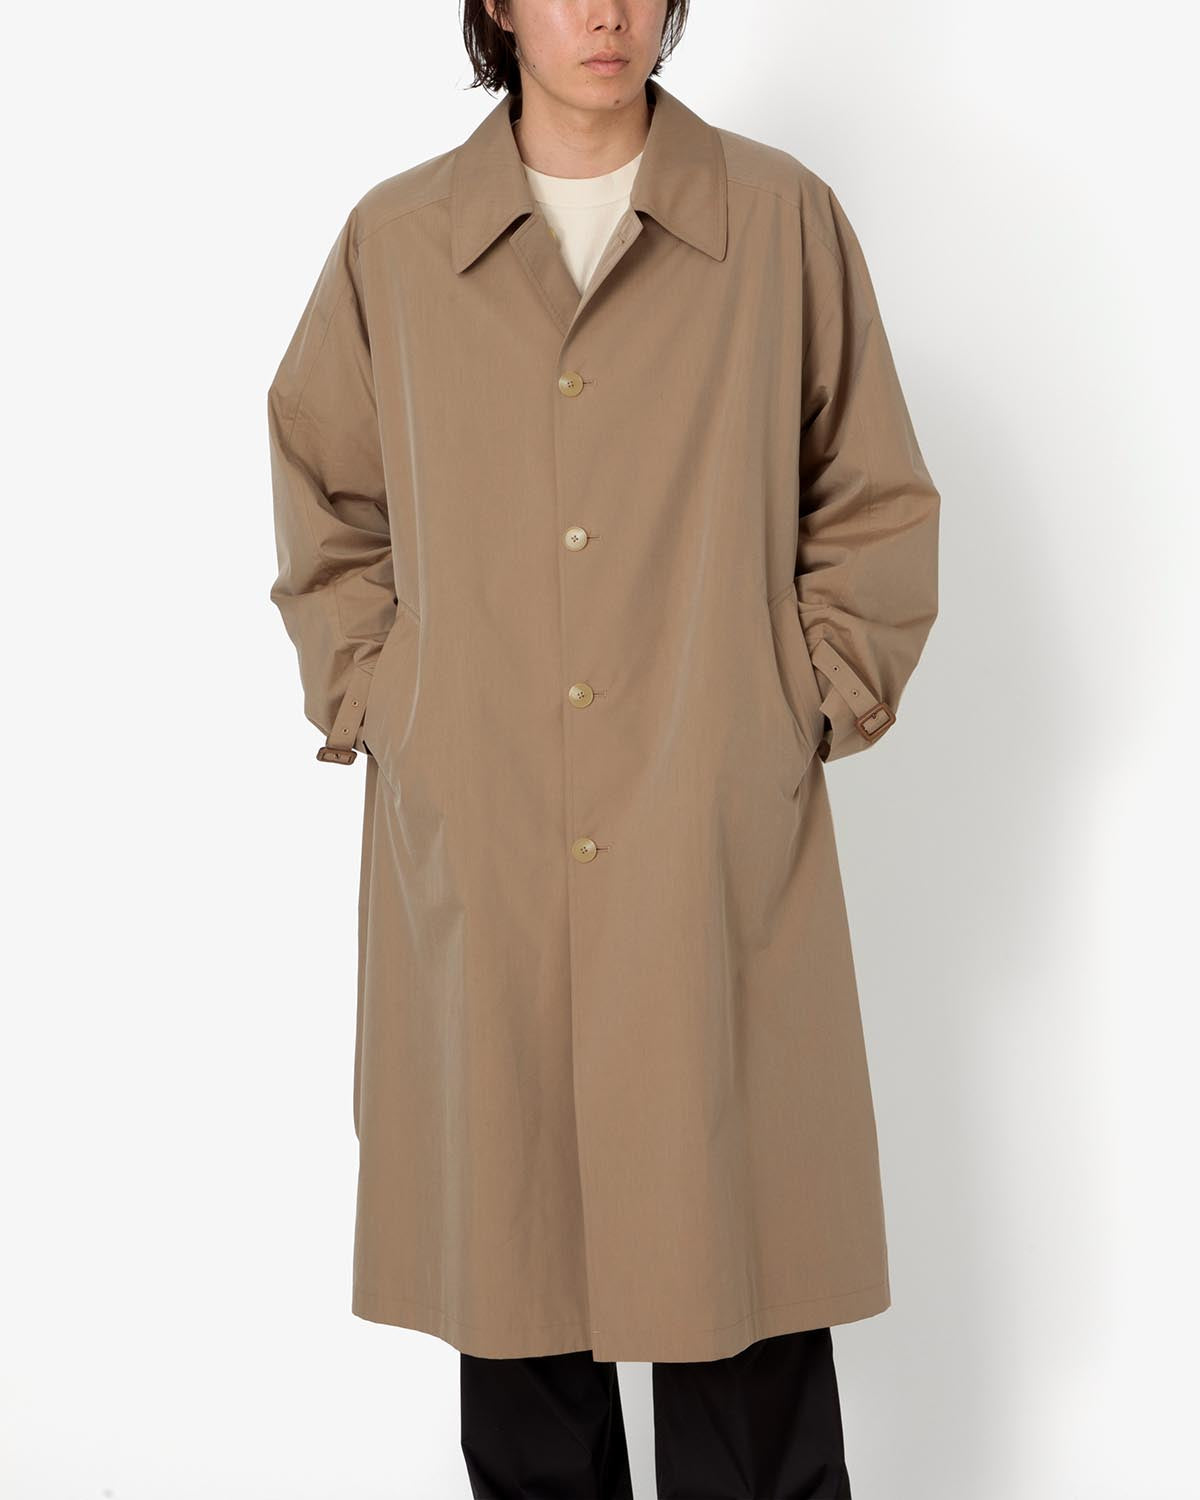 FINX POLYESTER WEATHER CHAMBRAY SOUTIEN COLLOAR COAT